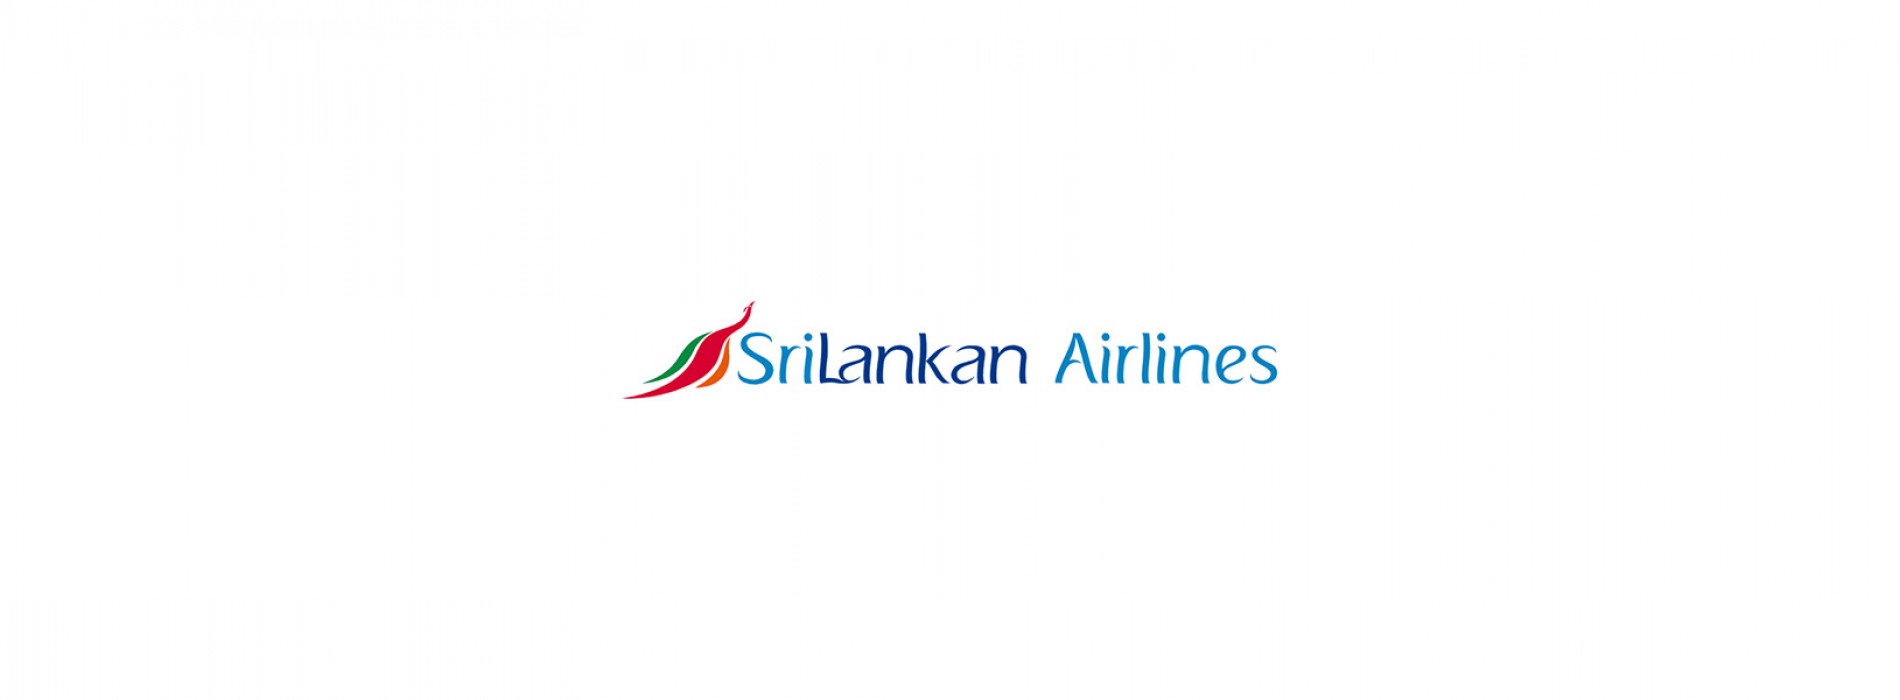 SriLankan Airlines Records First Fourth Quarter Profit Since 2006